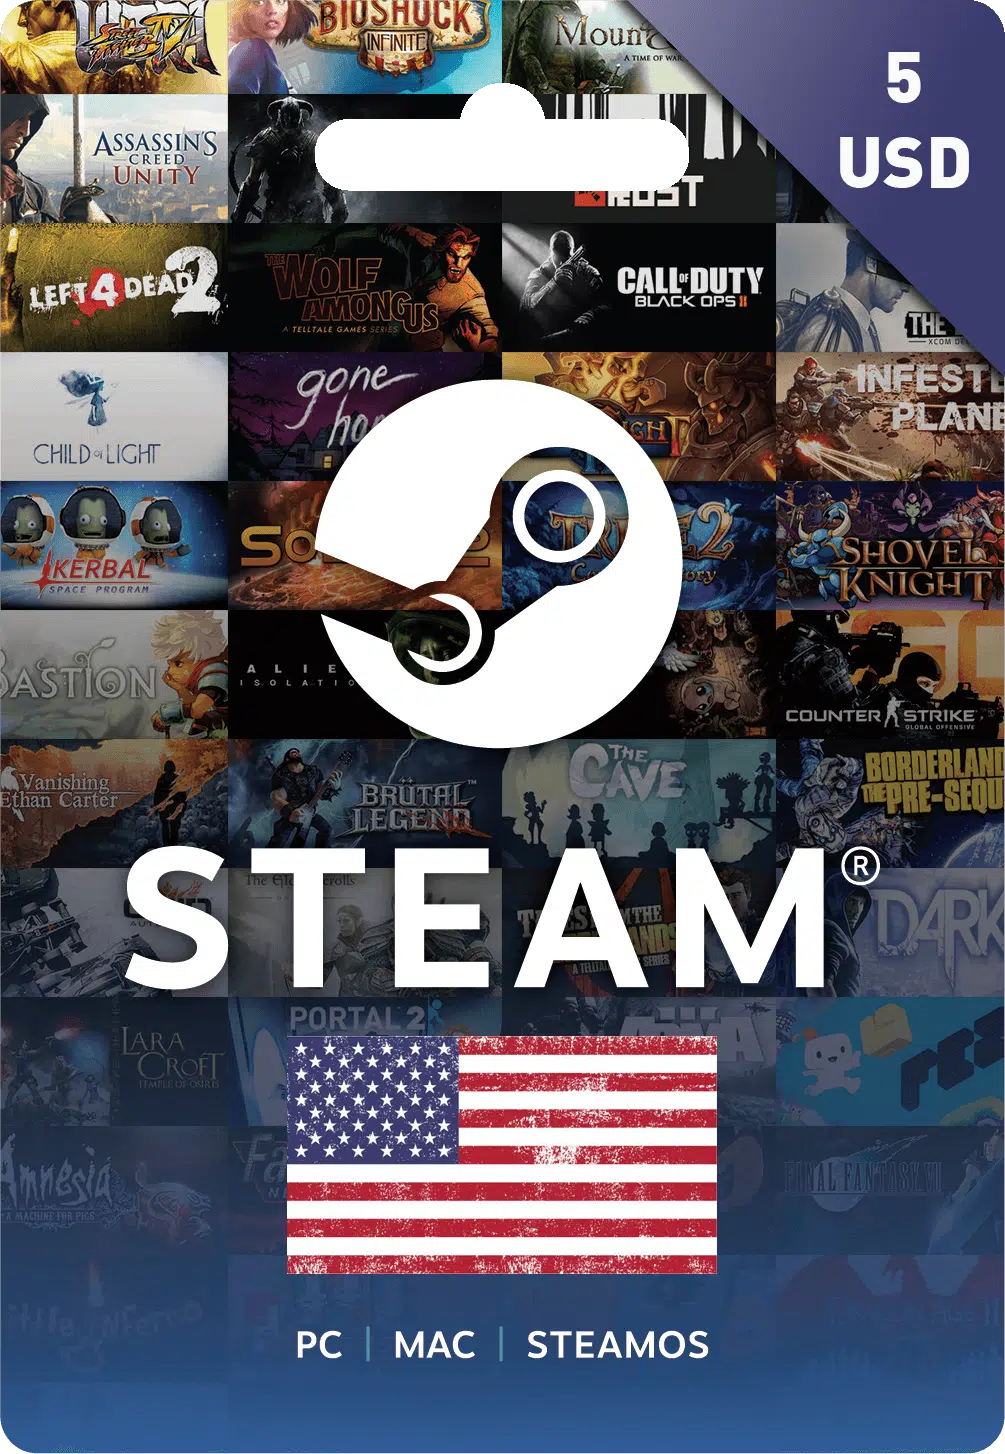 Buy Steam Wallet Codes 5 USD Now IaM A Live Store